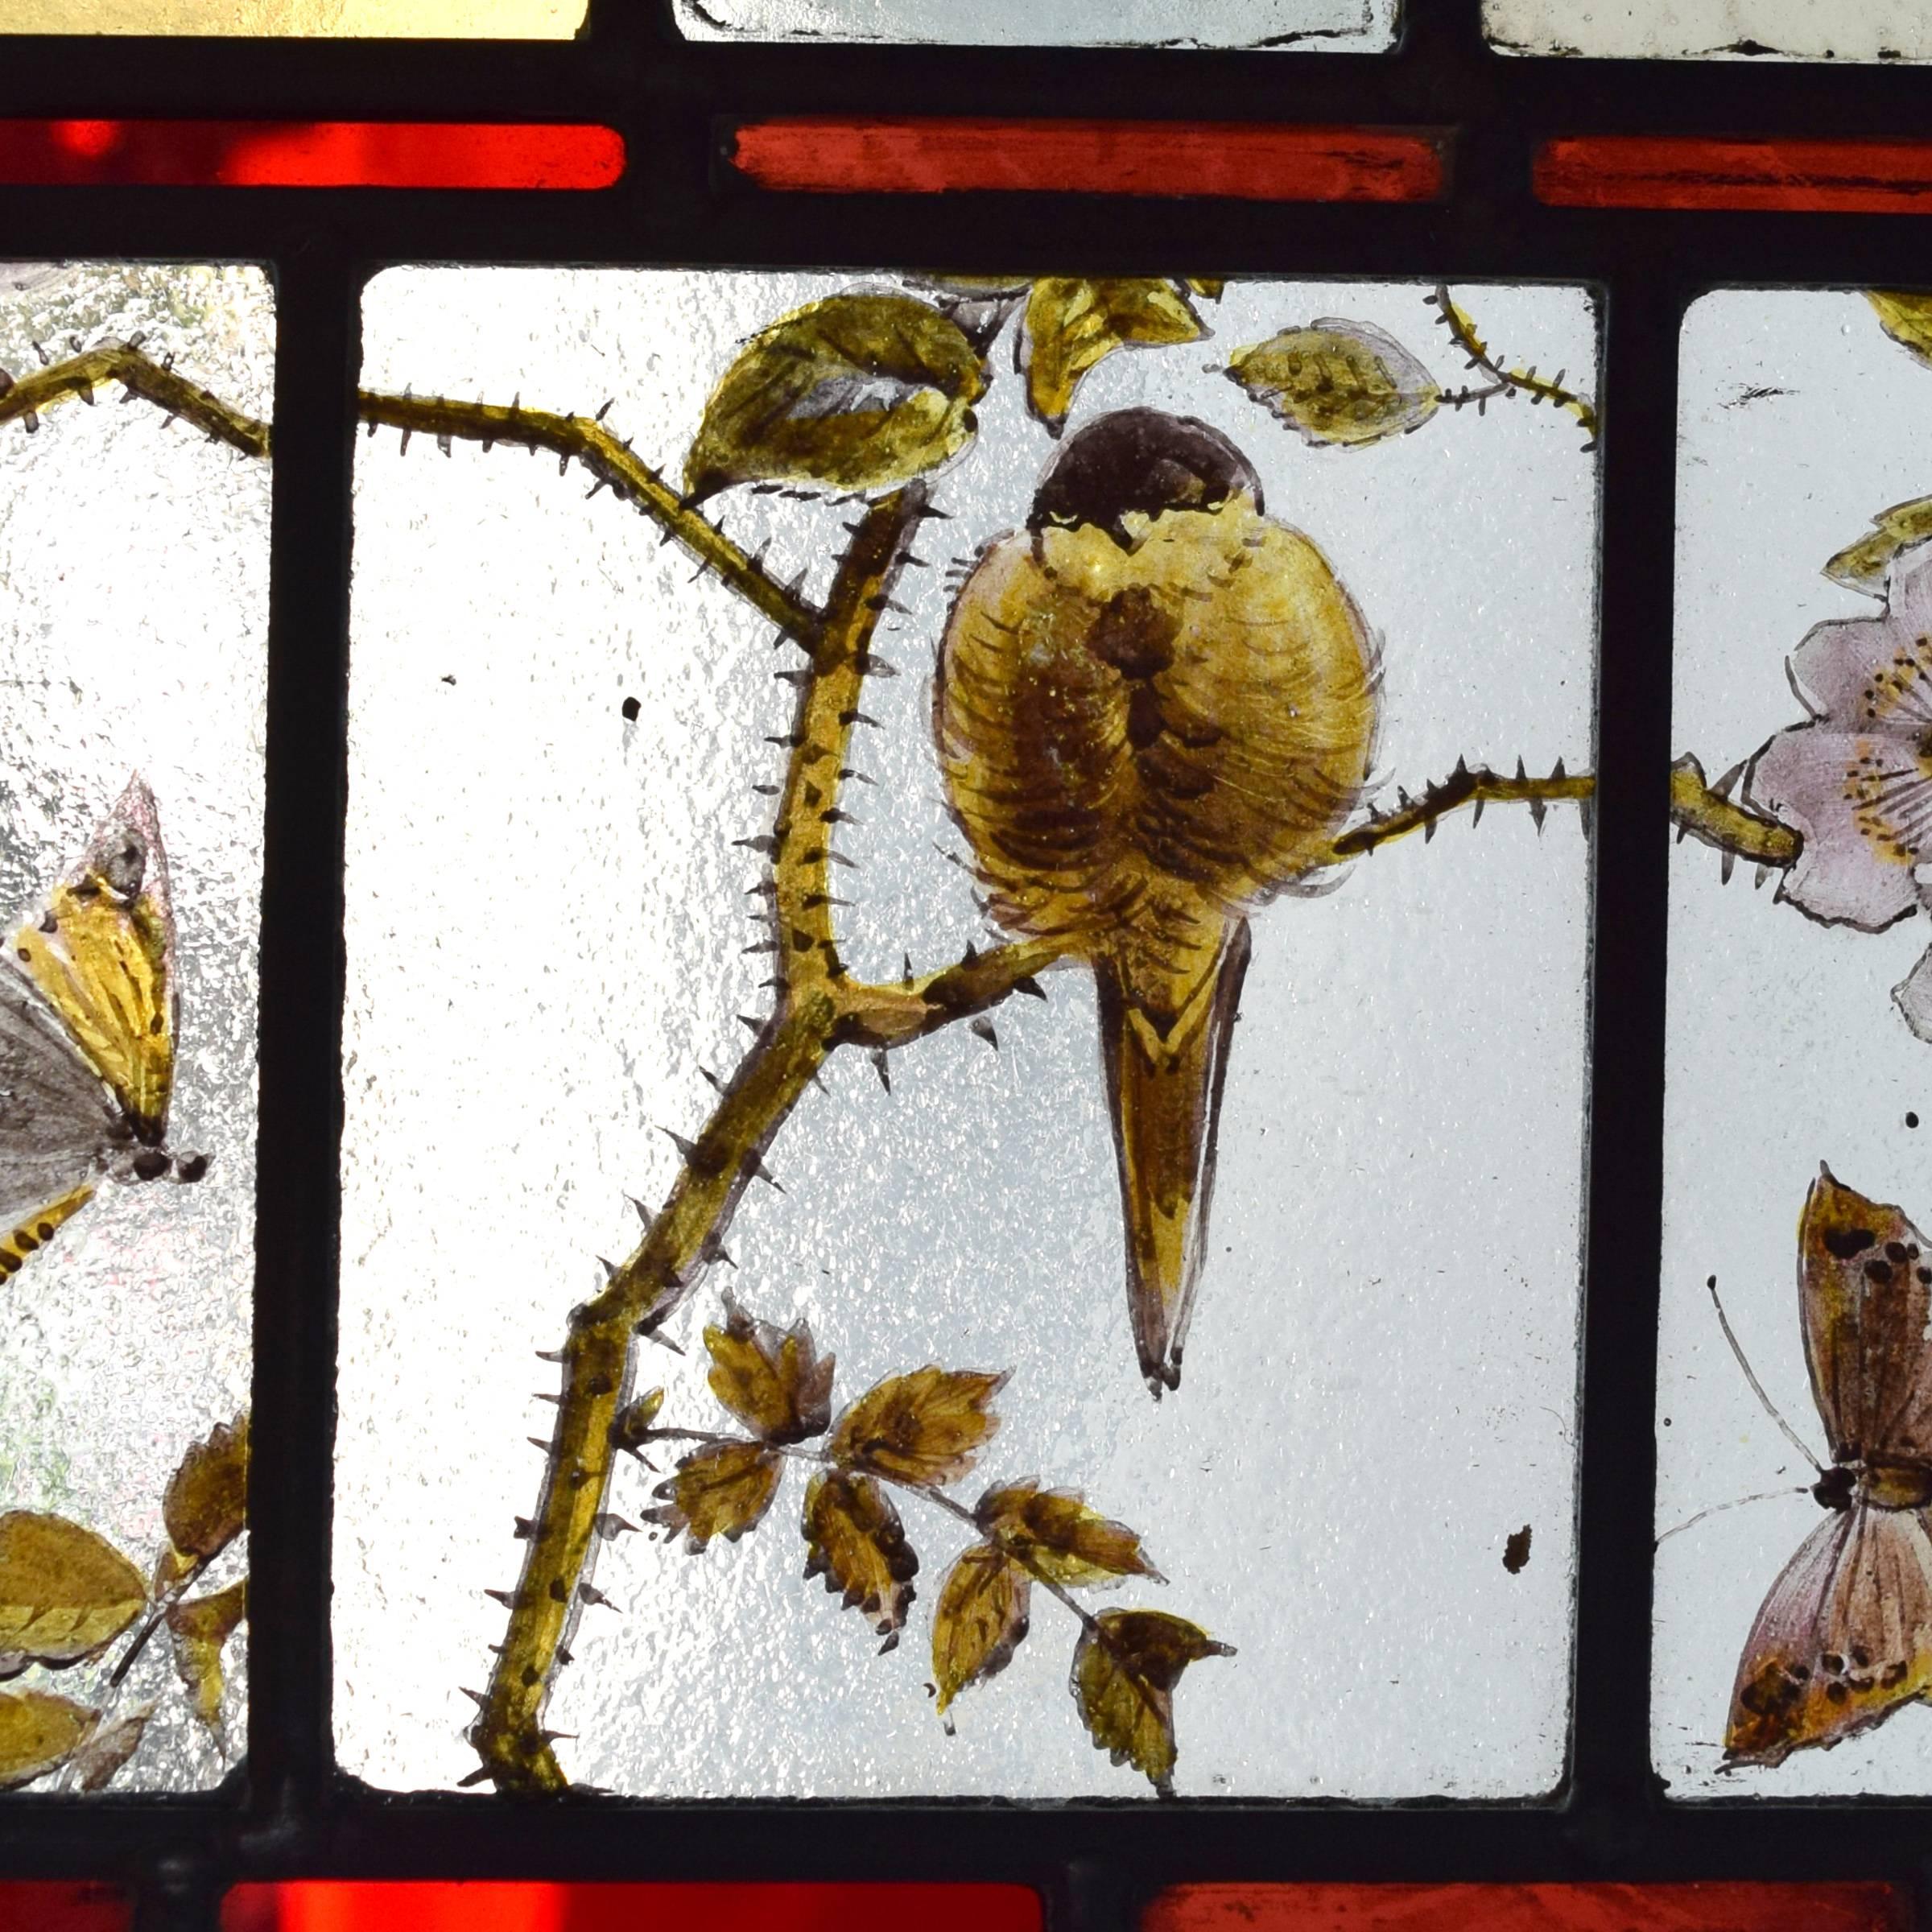 A lovely English art glass window with a hand-painted bird on a branch amongst butterflies within a colorful frame.